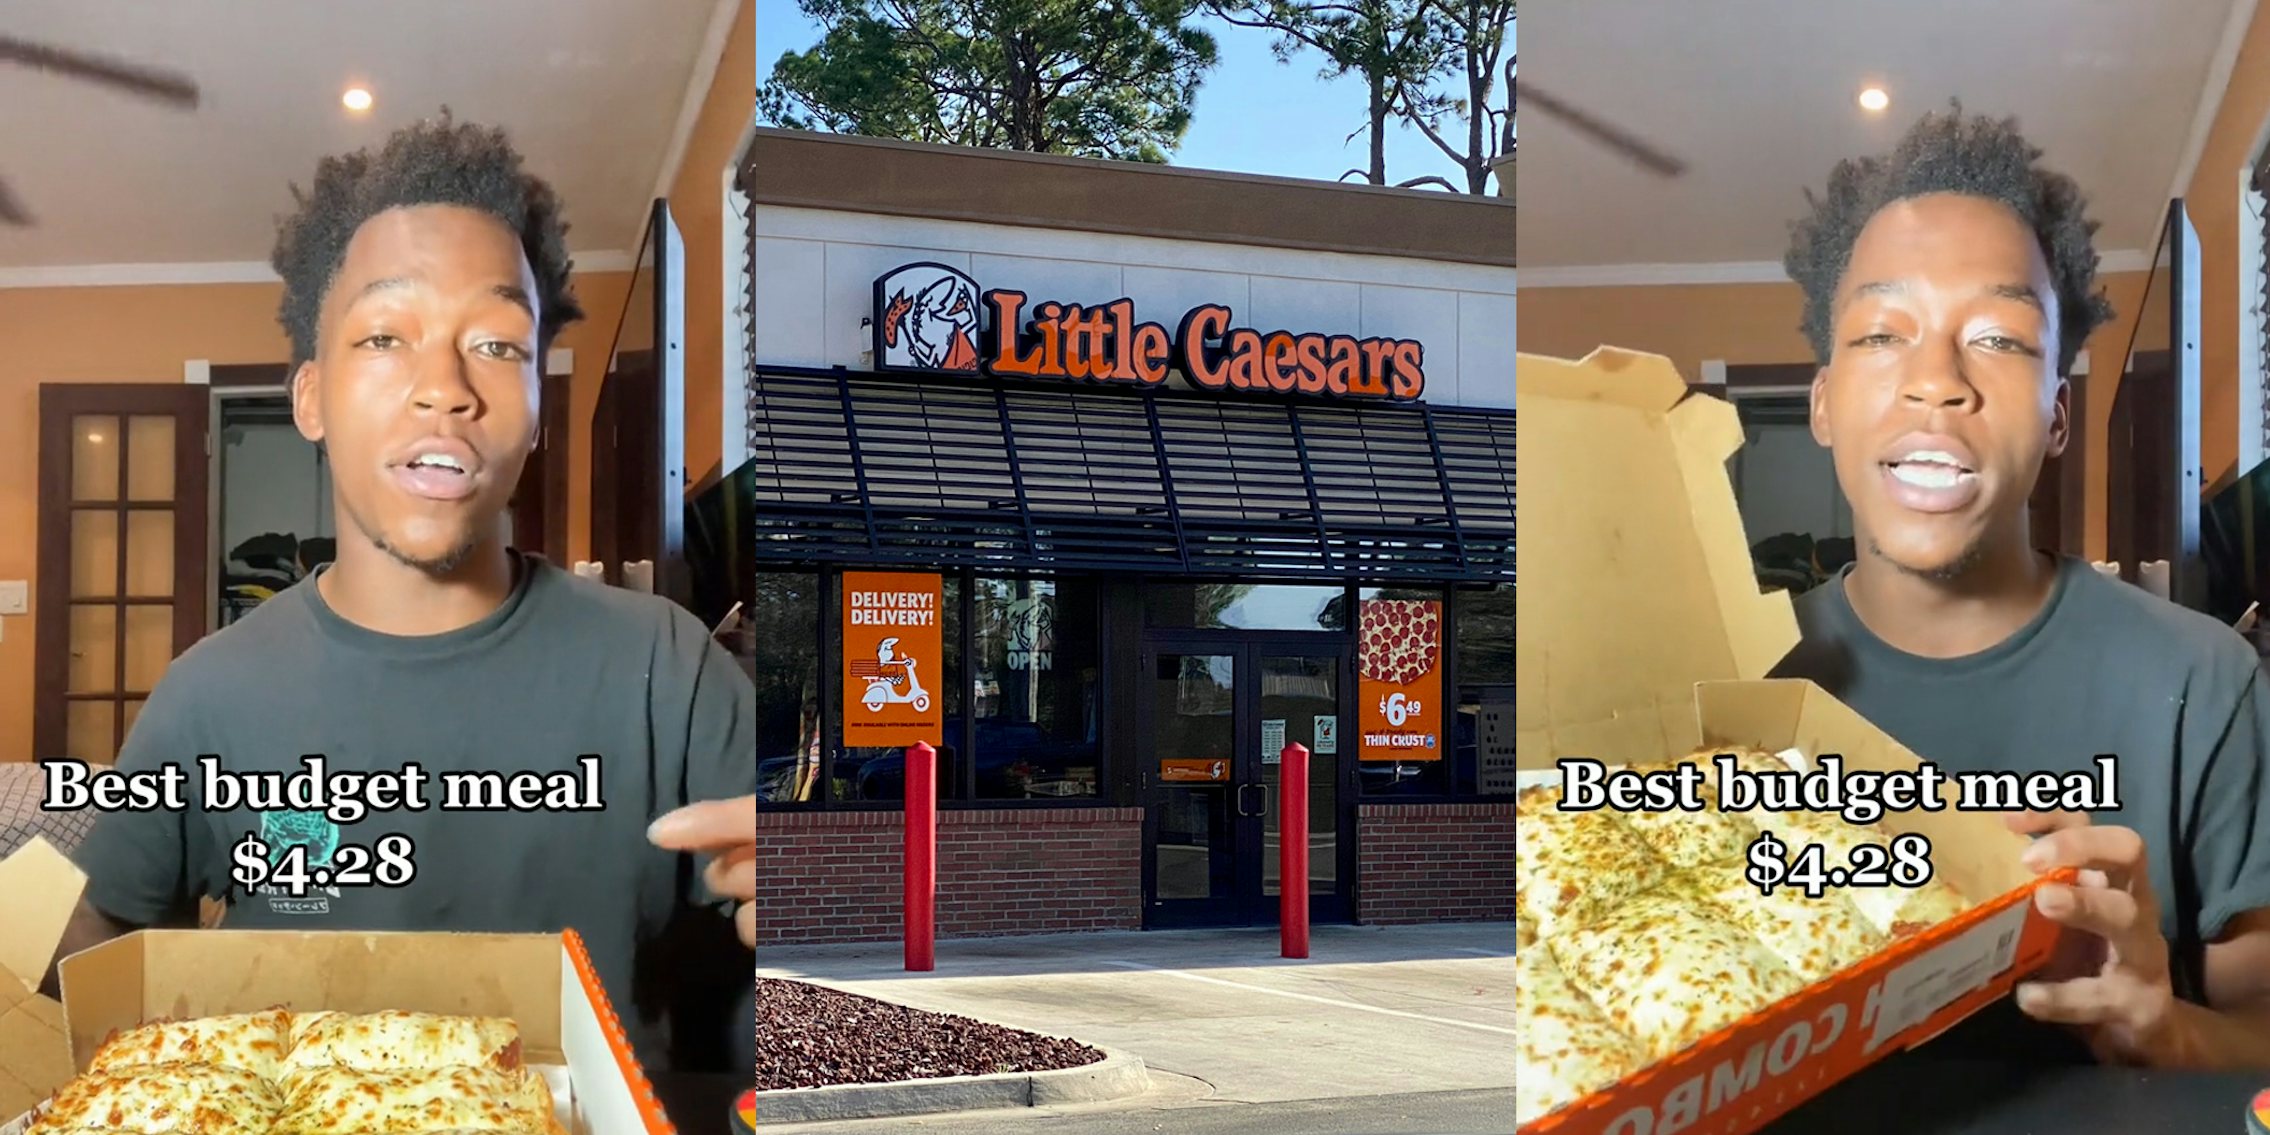 Little Caesar's customer speaking with cheese bread in box with caption 'Best budget meal $4.28' (l) Little Caesar's building with sign (c) Little Caesar's customer speaking with cheese bread in box with caption 'Best budget meal $4.28' (r)